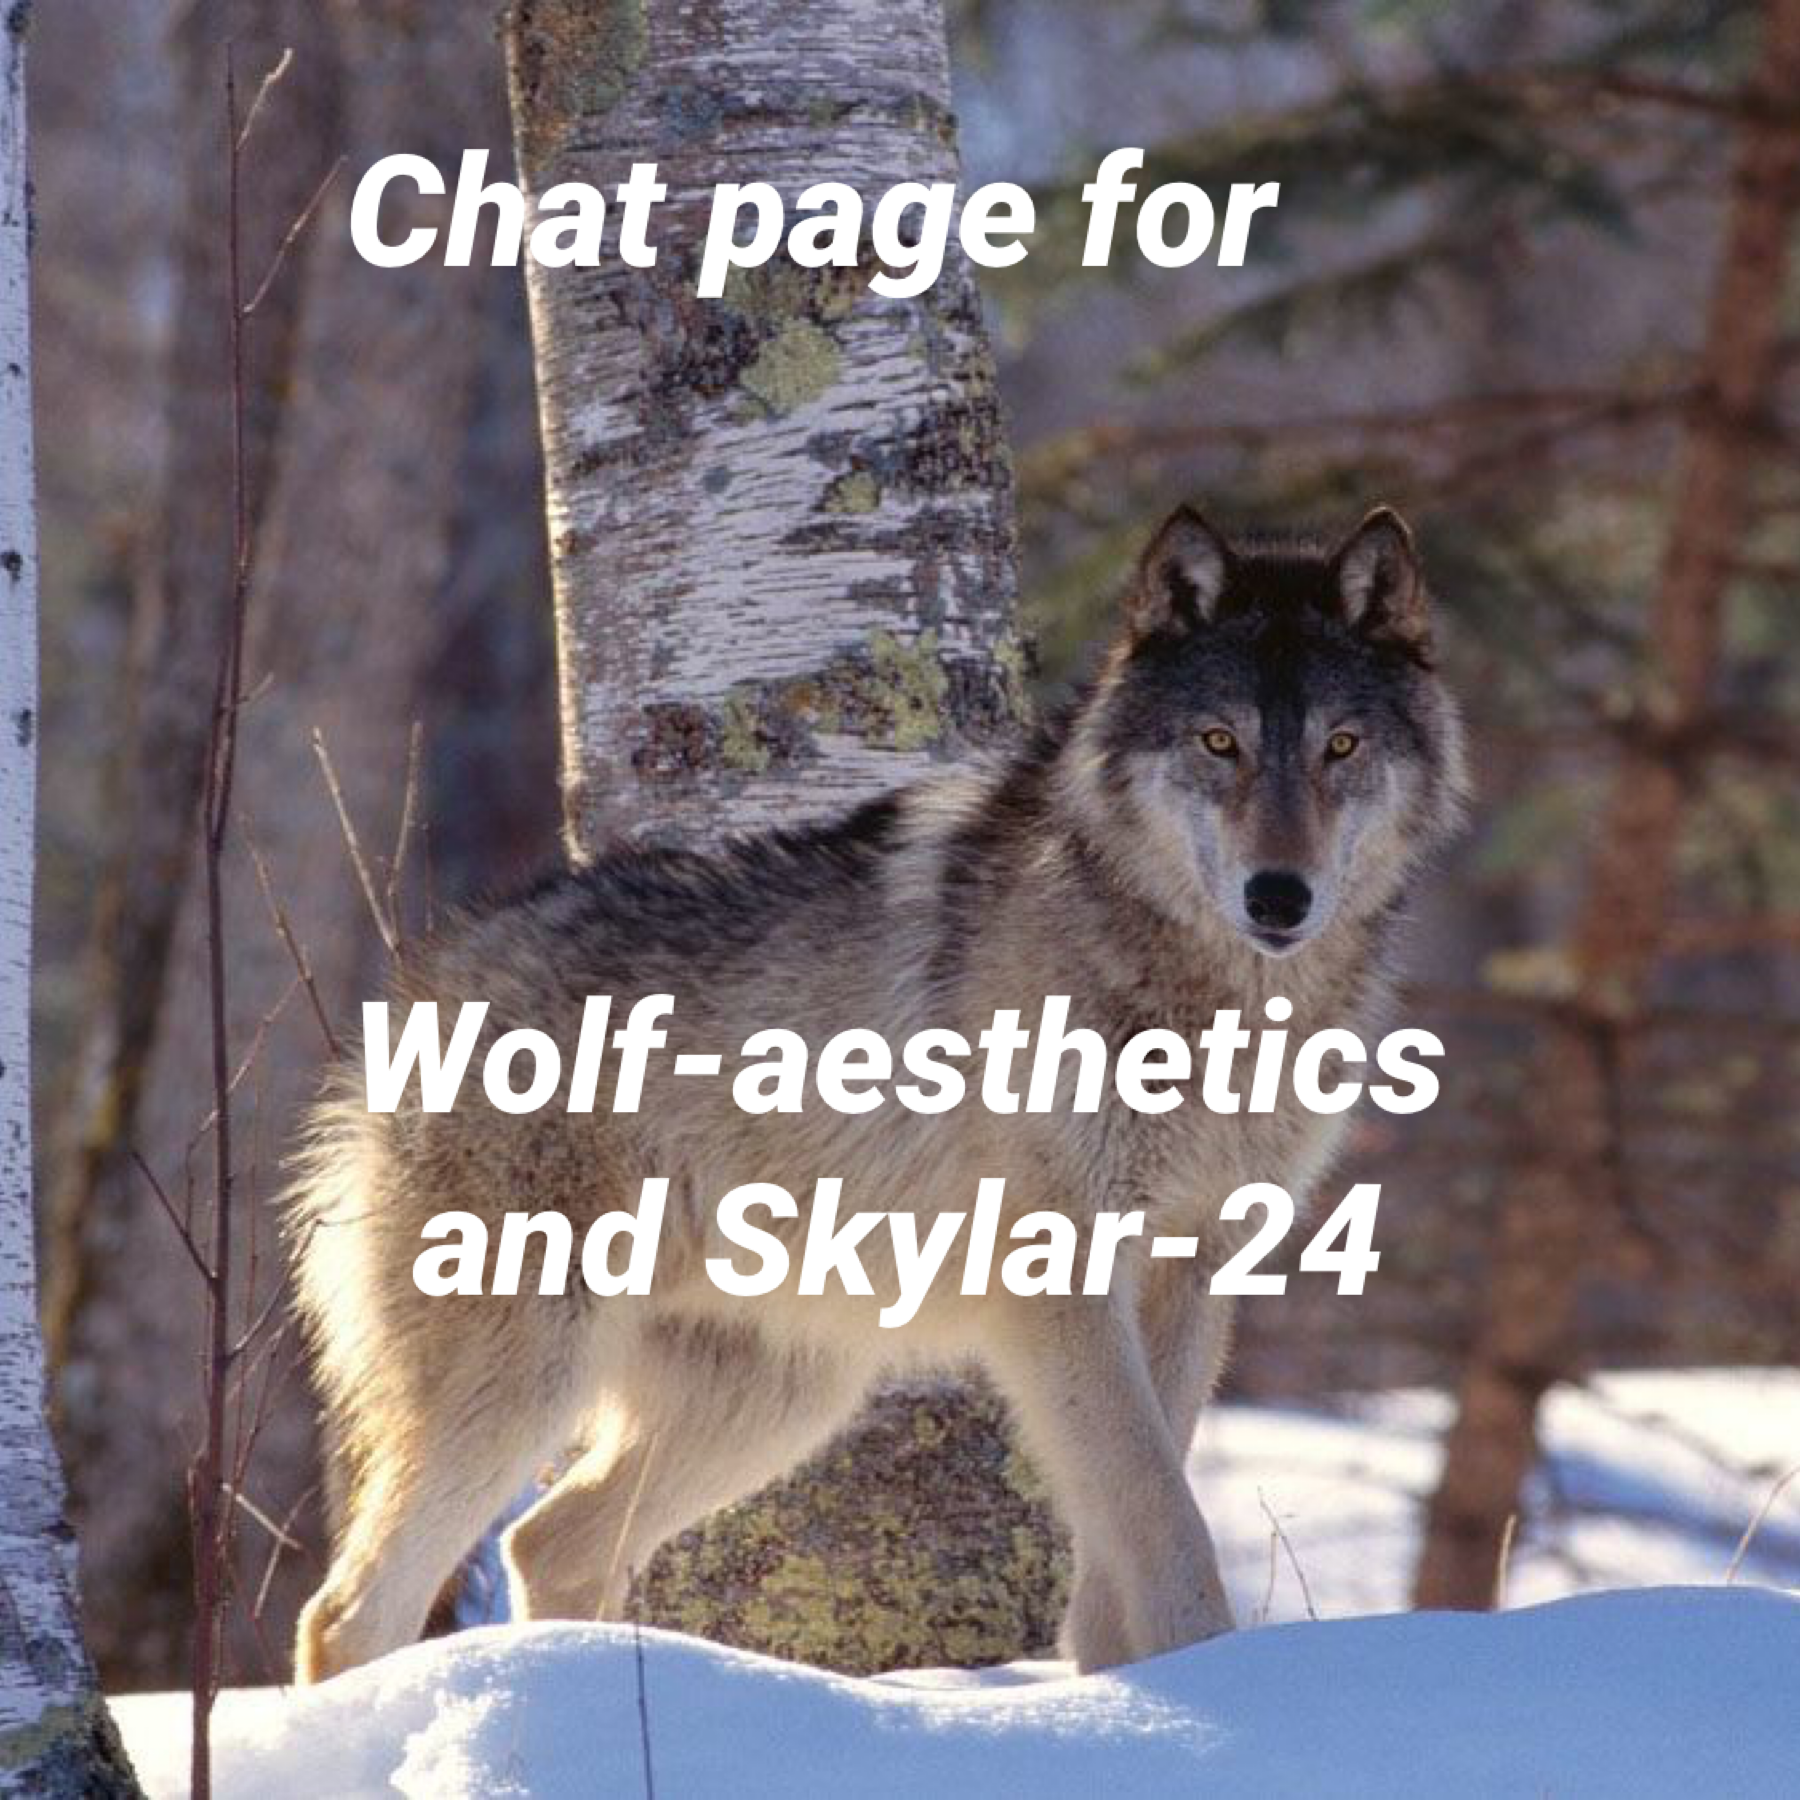 Tap

Only Wolf-aesthetics and Skykar-24 can do on this page 